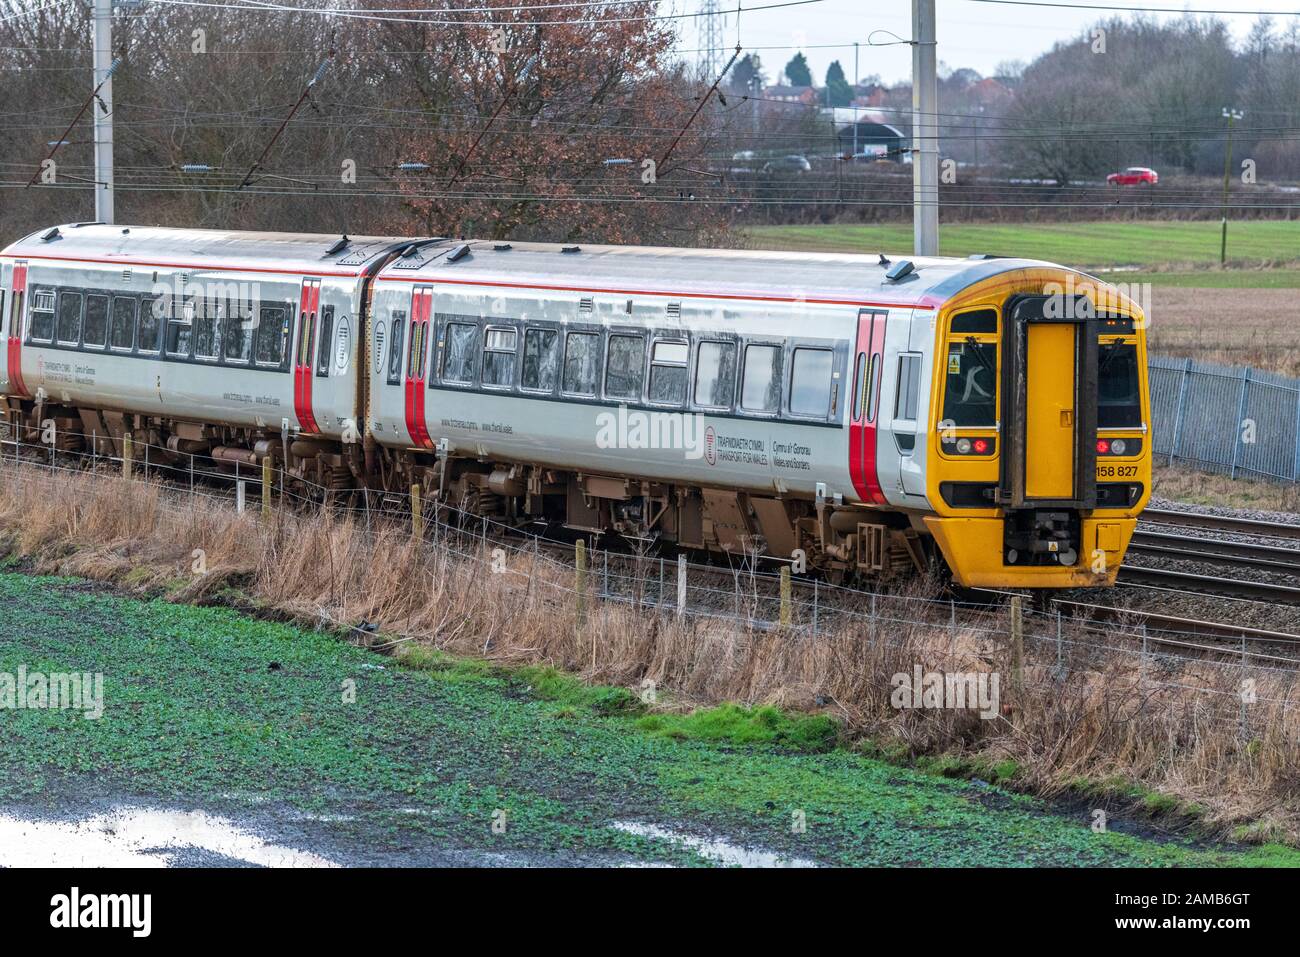 Class 158 Express Sprinter diesel multiple-unit train. Trains for Wales livery. Stock Photo